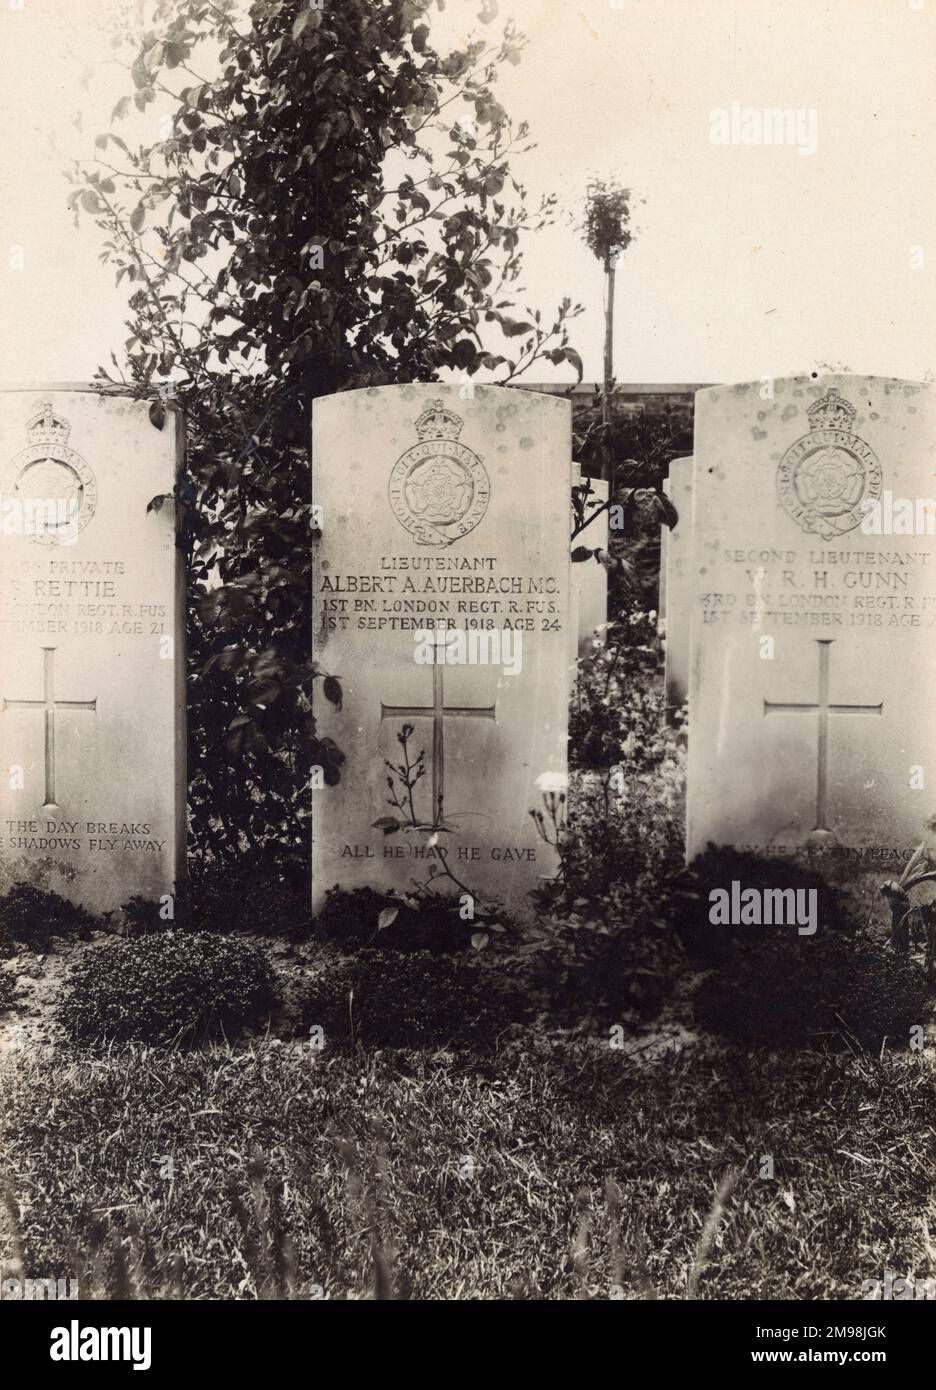 First World War headstones, Sailly-Saillisel Military Cemetery, Northern France, photographed in April 1930.  At the centre is the headstone for Lieutenant Albert A Auerbach MC, of the 1st Battalion London Regiment, Royal Fusiliers, killed at Bouchavesnes on 1 September 1918 at the age of 24. Stock Photo